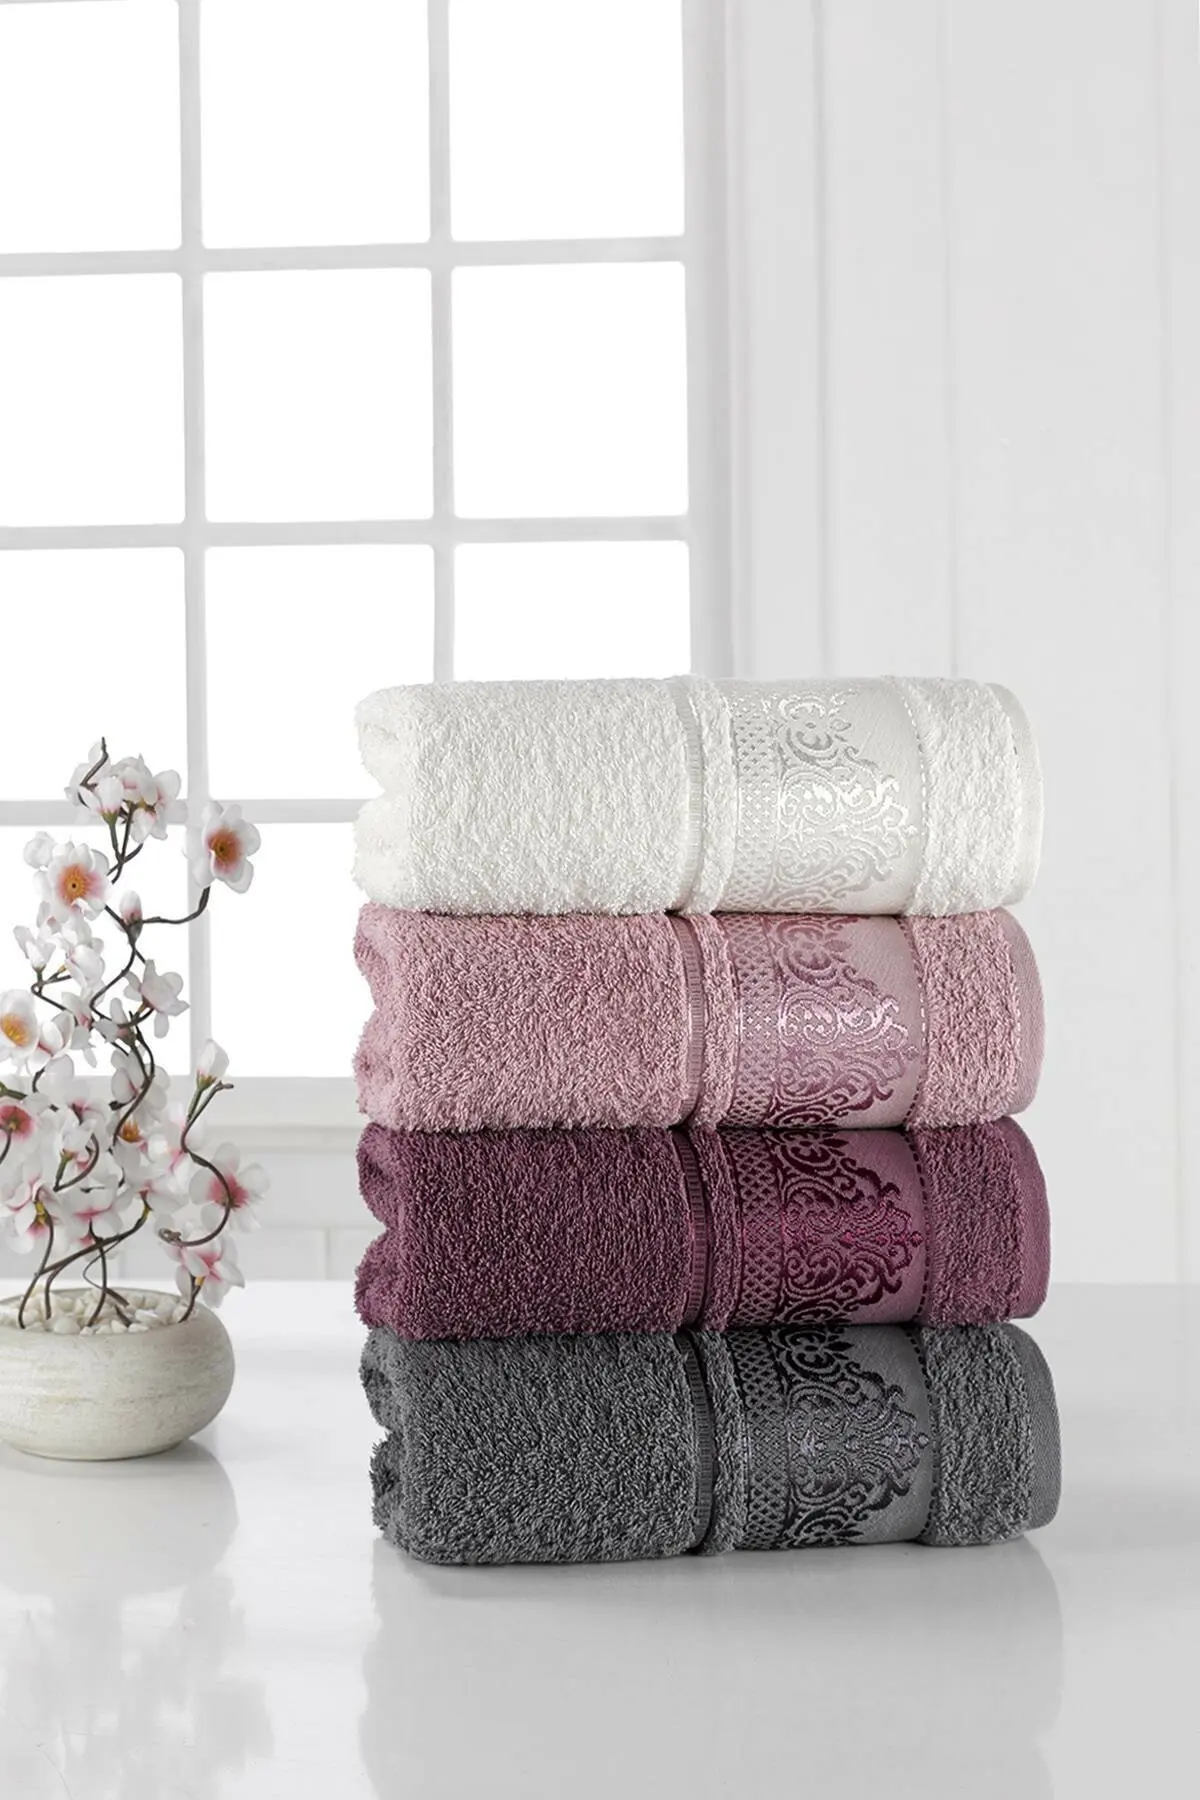 

Luxury %100 cotton 4pcs Face and Hand Towels High Quality Soft Cotton High Absorbent Bathroom Towels